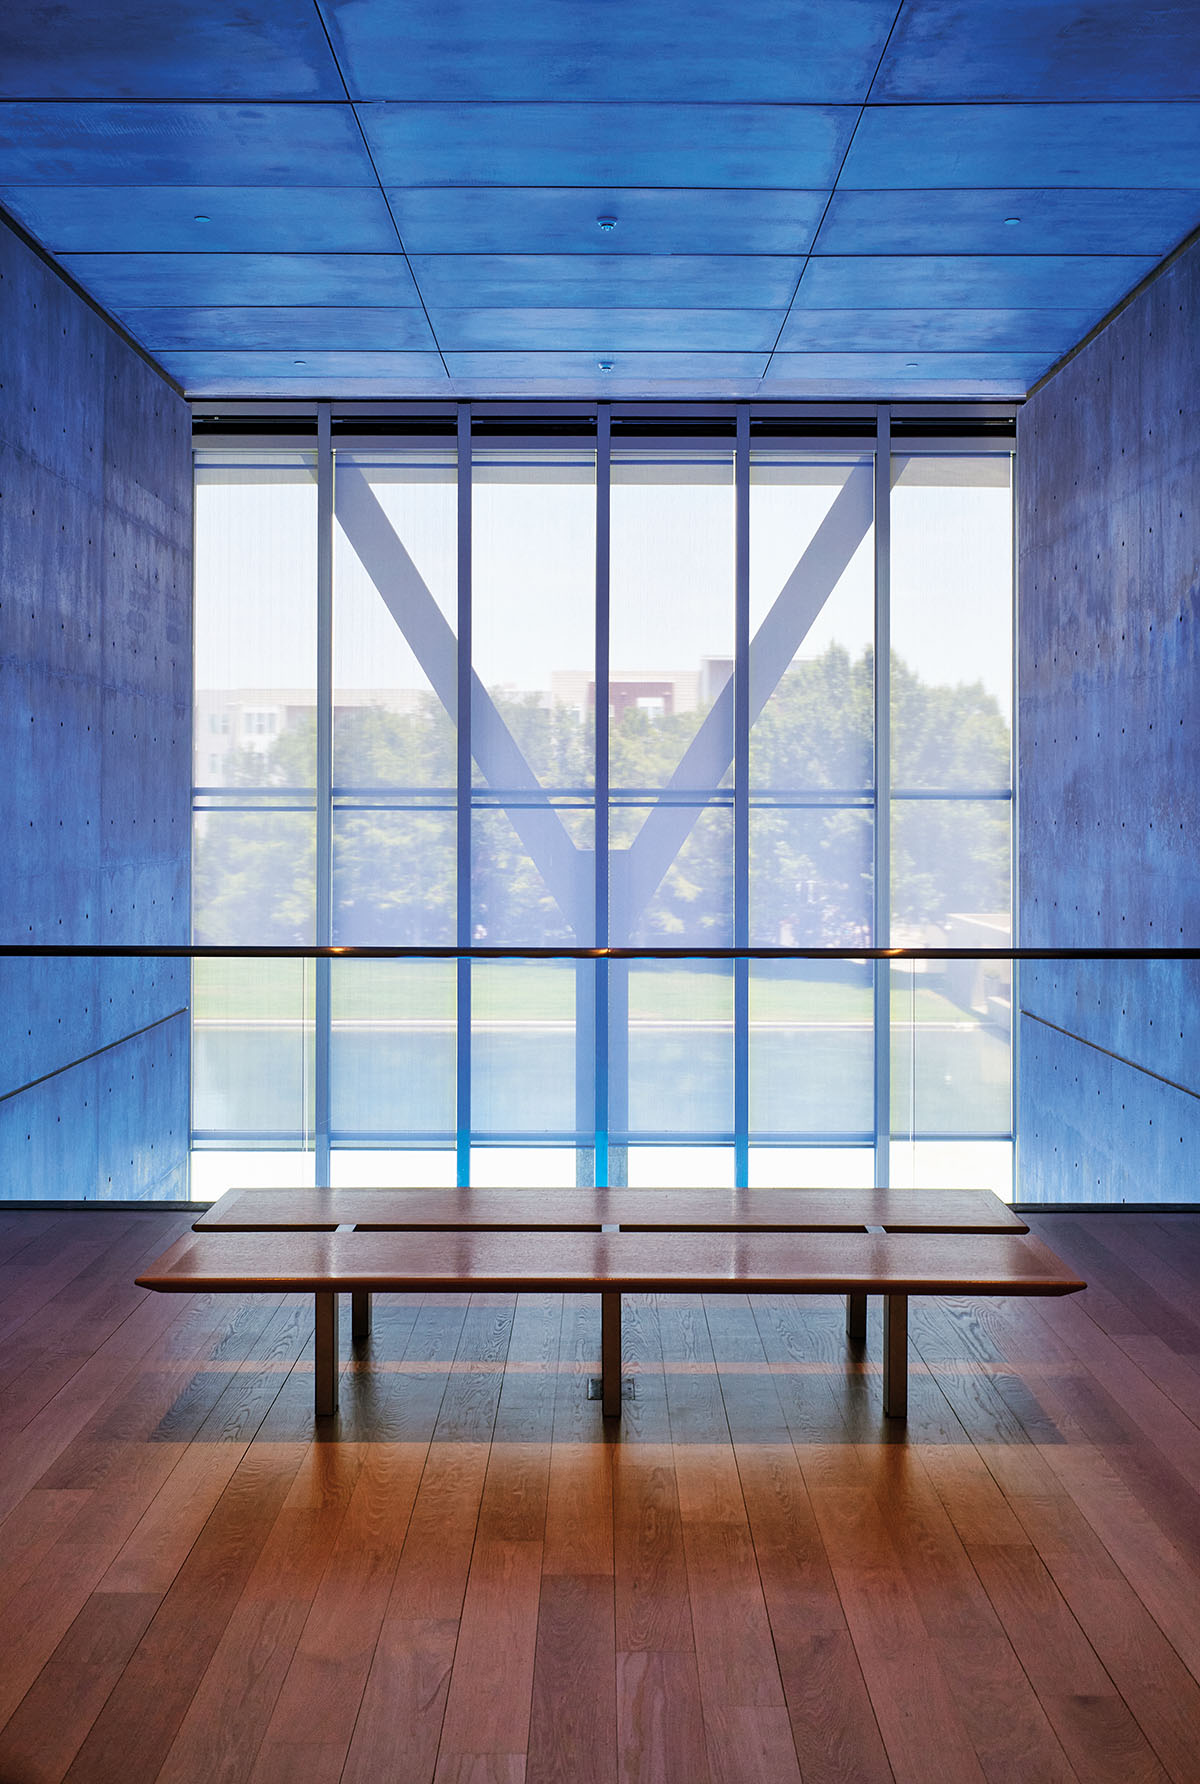 Light streams through window panes in a blue-painted room with wooden benches